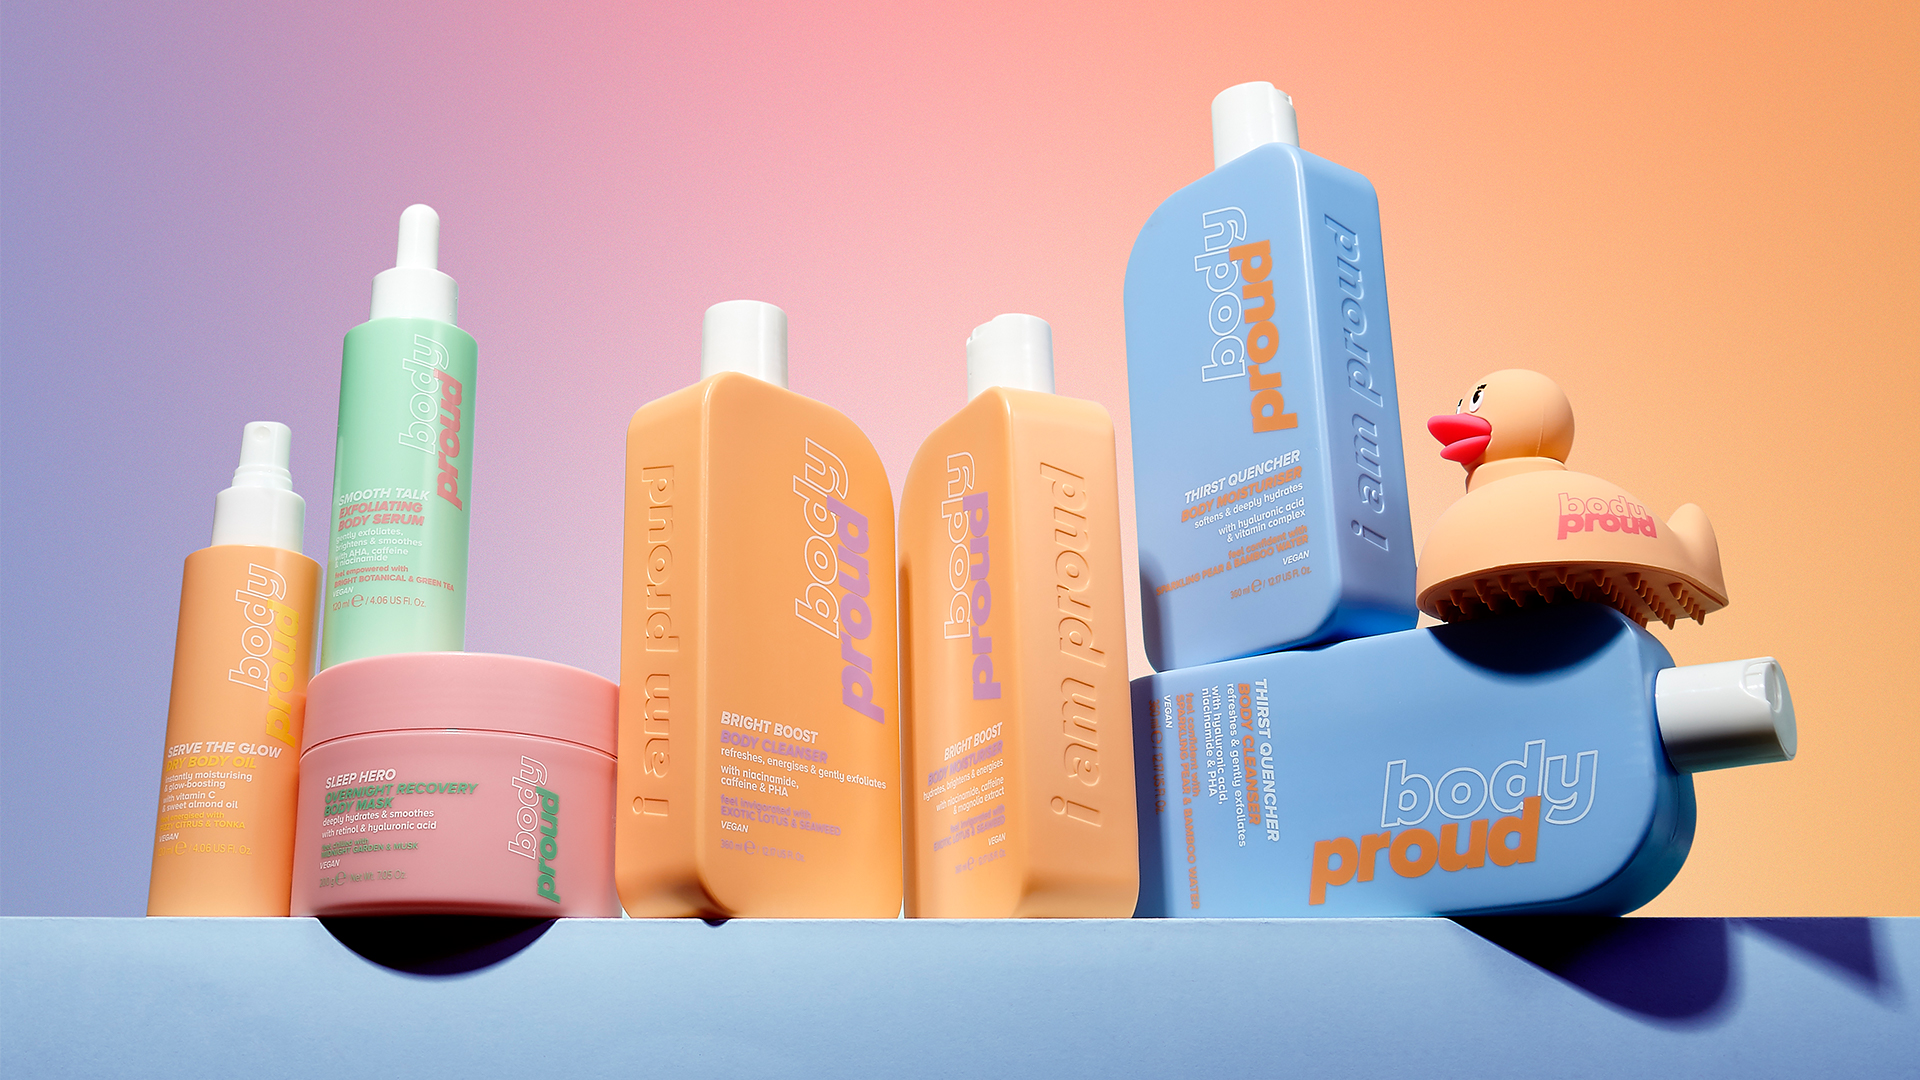 Body Proud - Bright Boost Body Cleanser